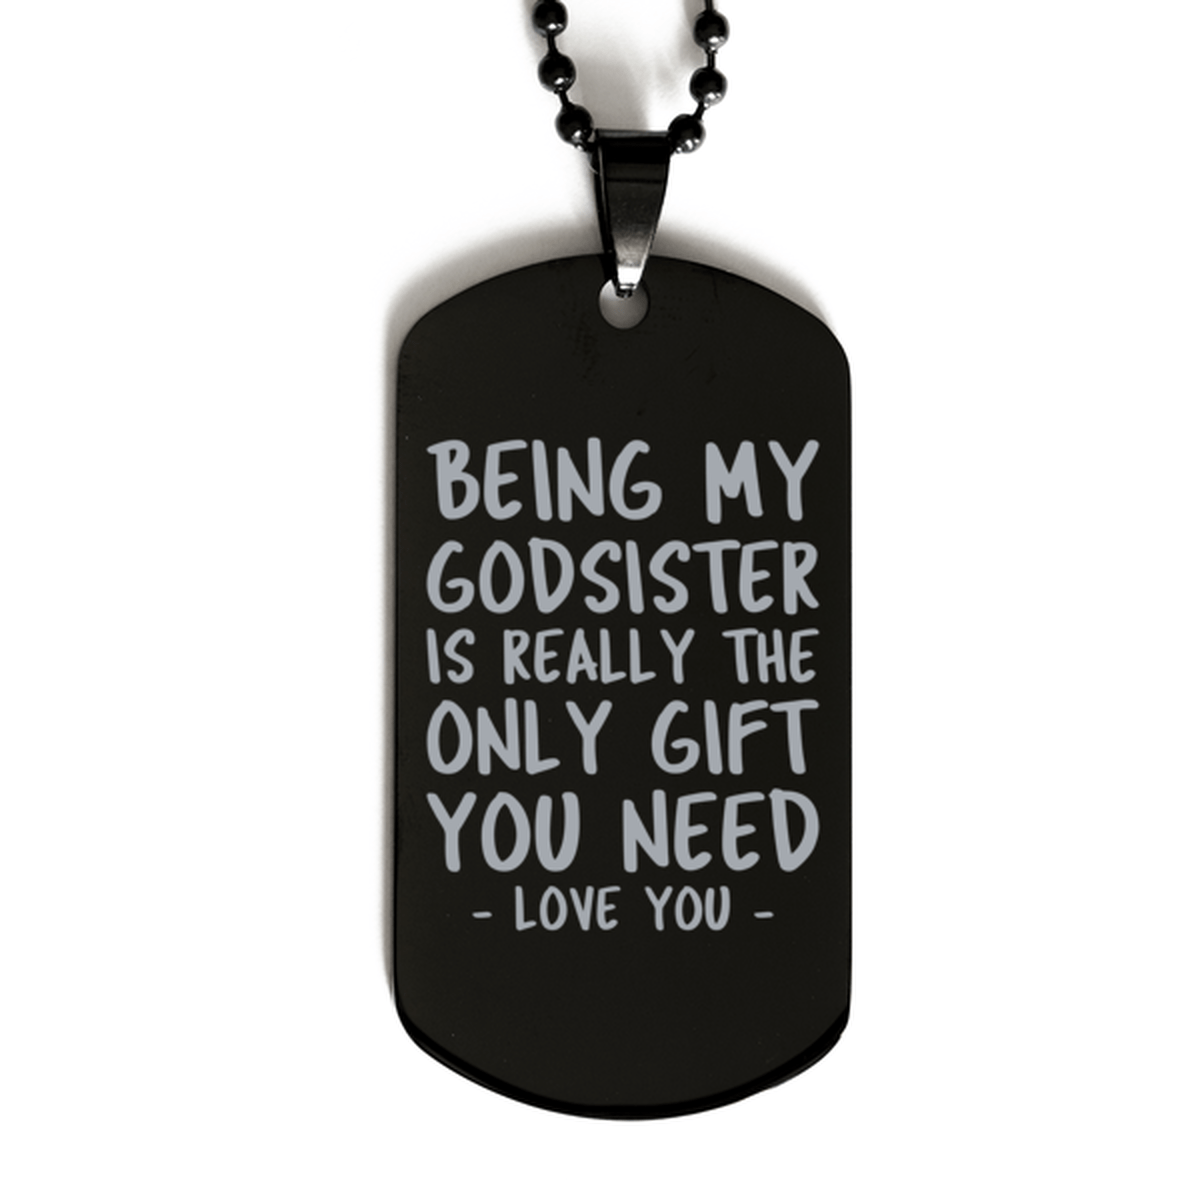 Funny Godsister Black Dog Tag Necklace, Being My Godsister Is Really the Only Gift You Need, Best Birthday Gifts for Godsister